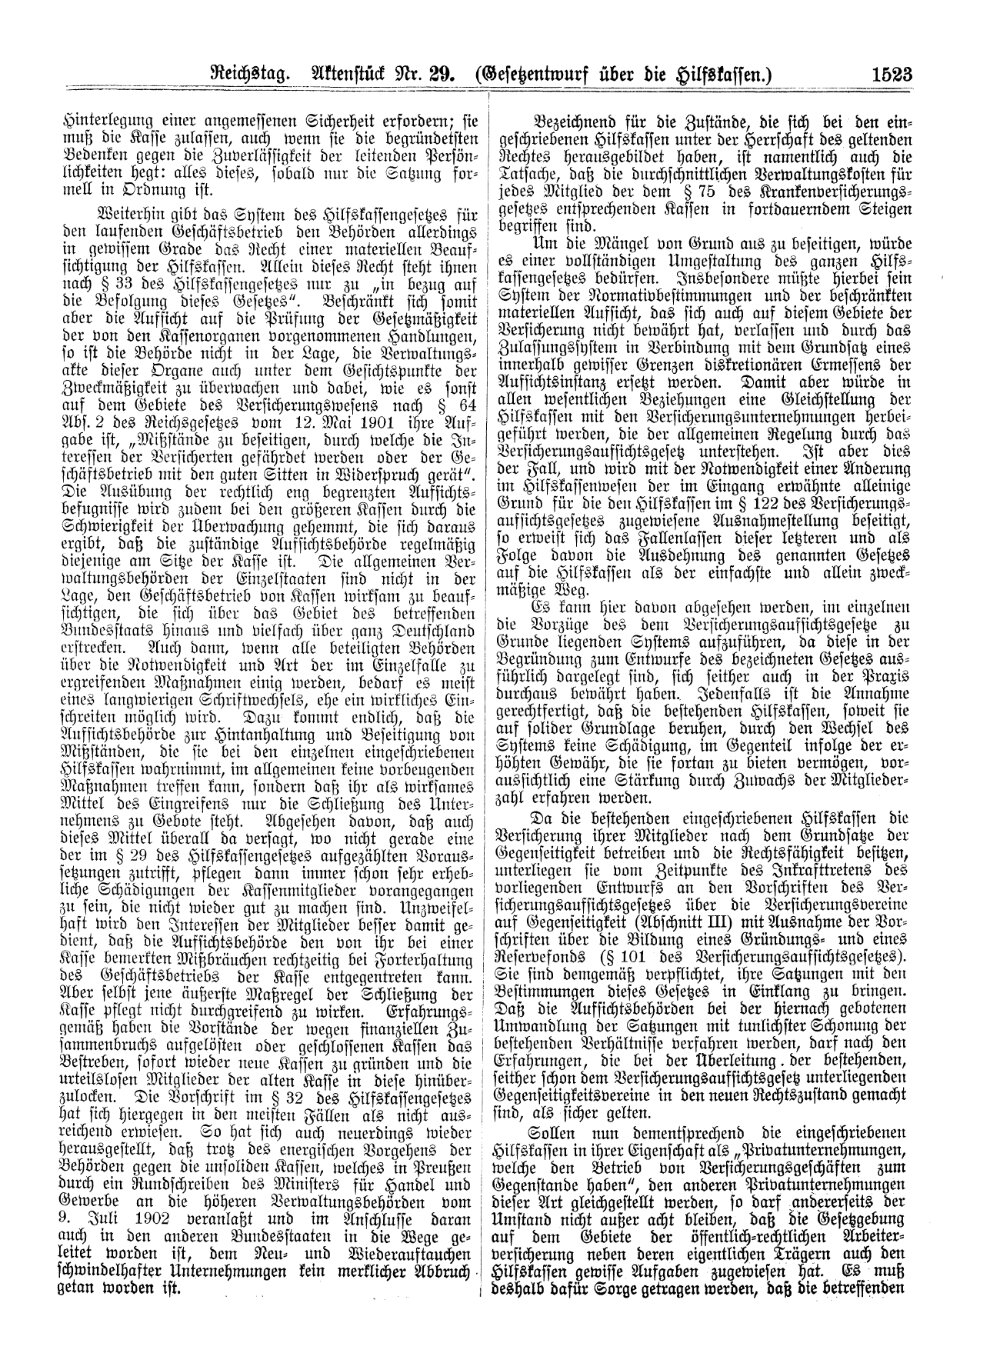 Scan of page 1523